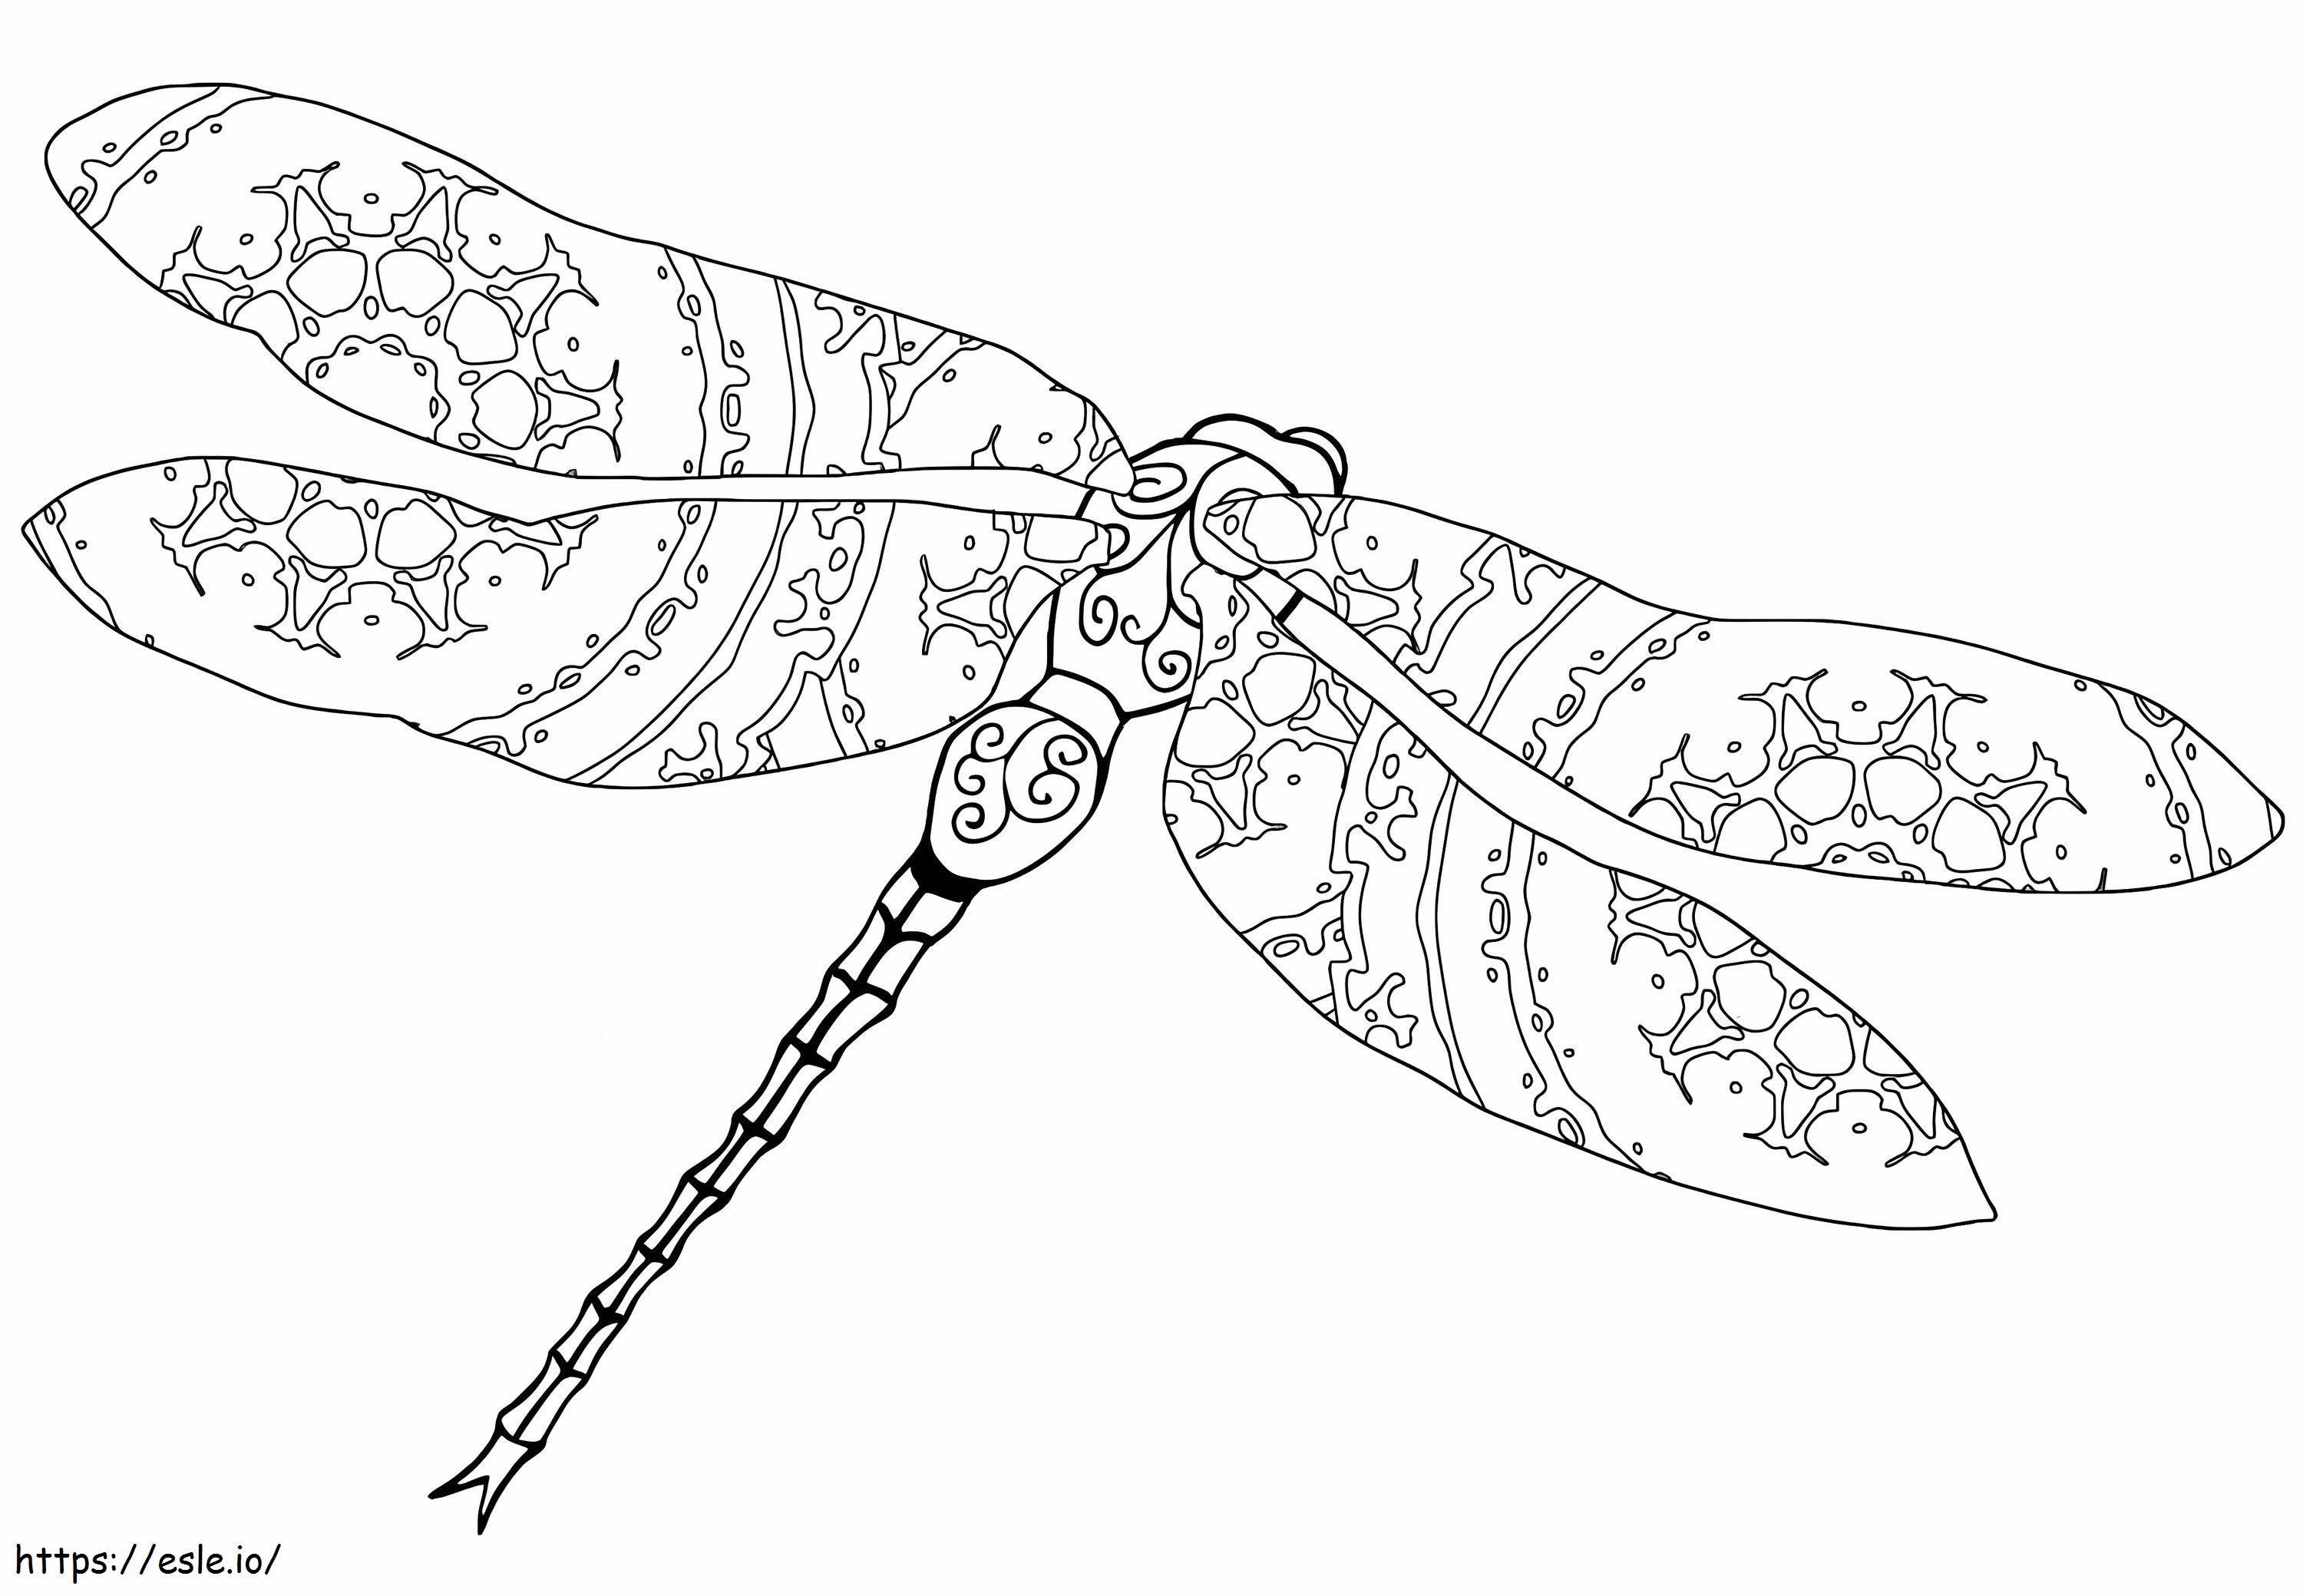 Intricate Dragonfly coloring page